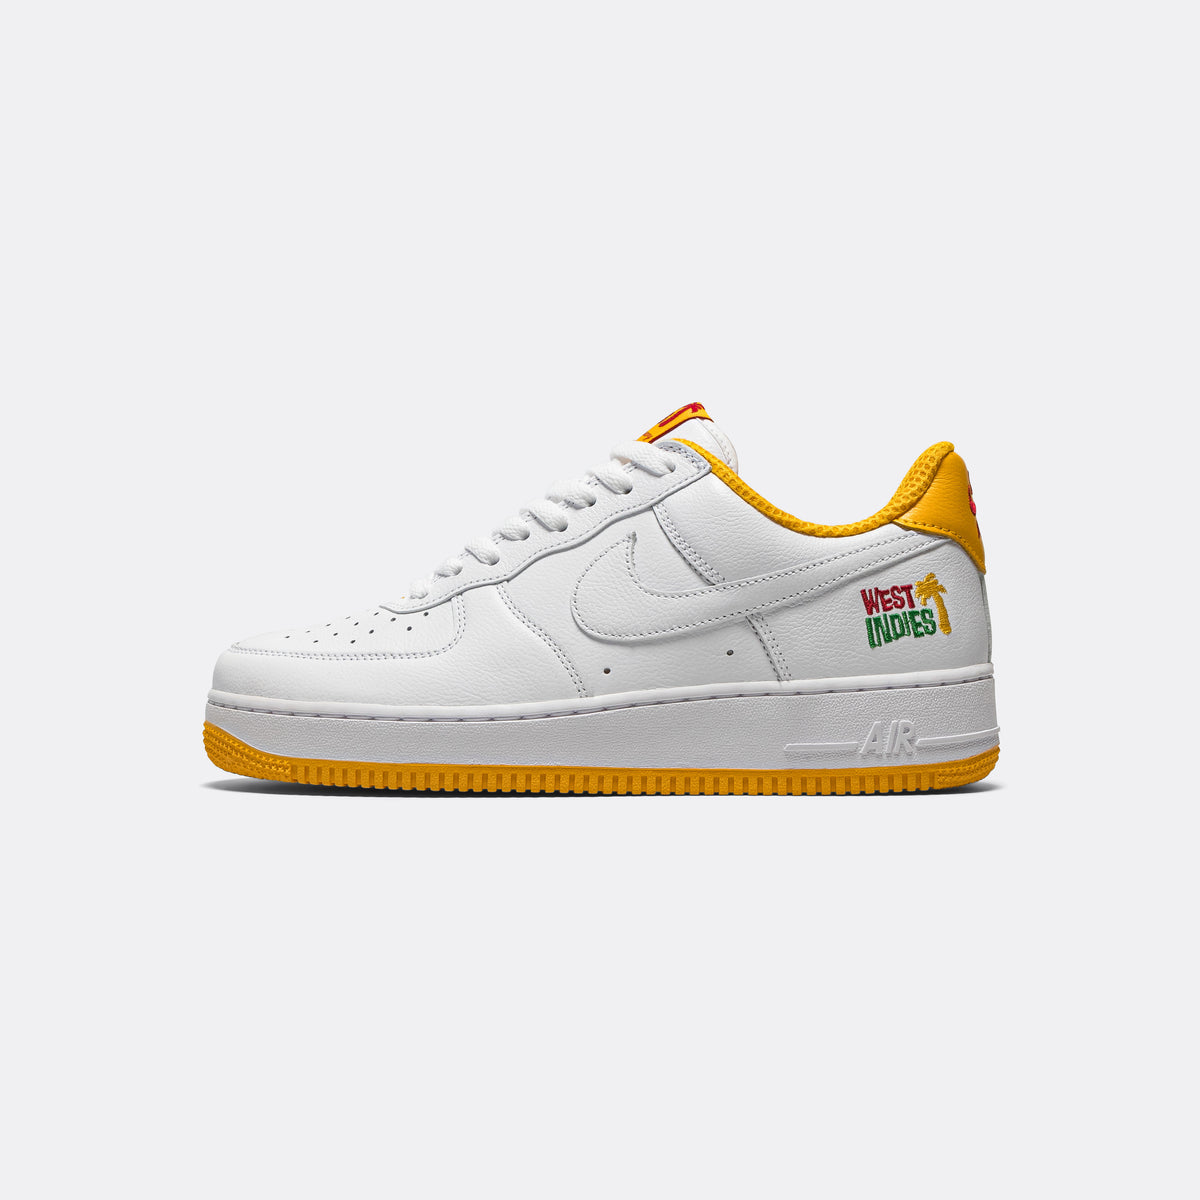 Nike Air Force 1 Low 'West Indies' - White/University Gold | UP THERE